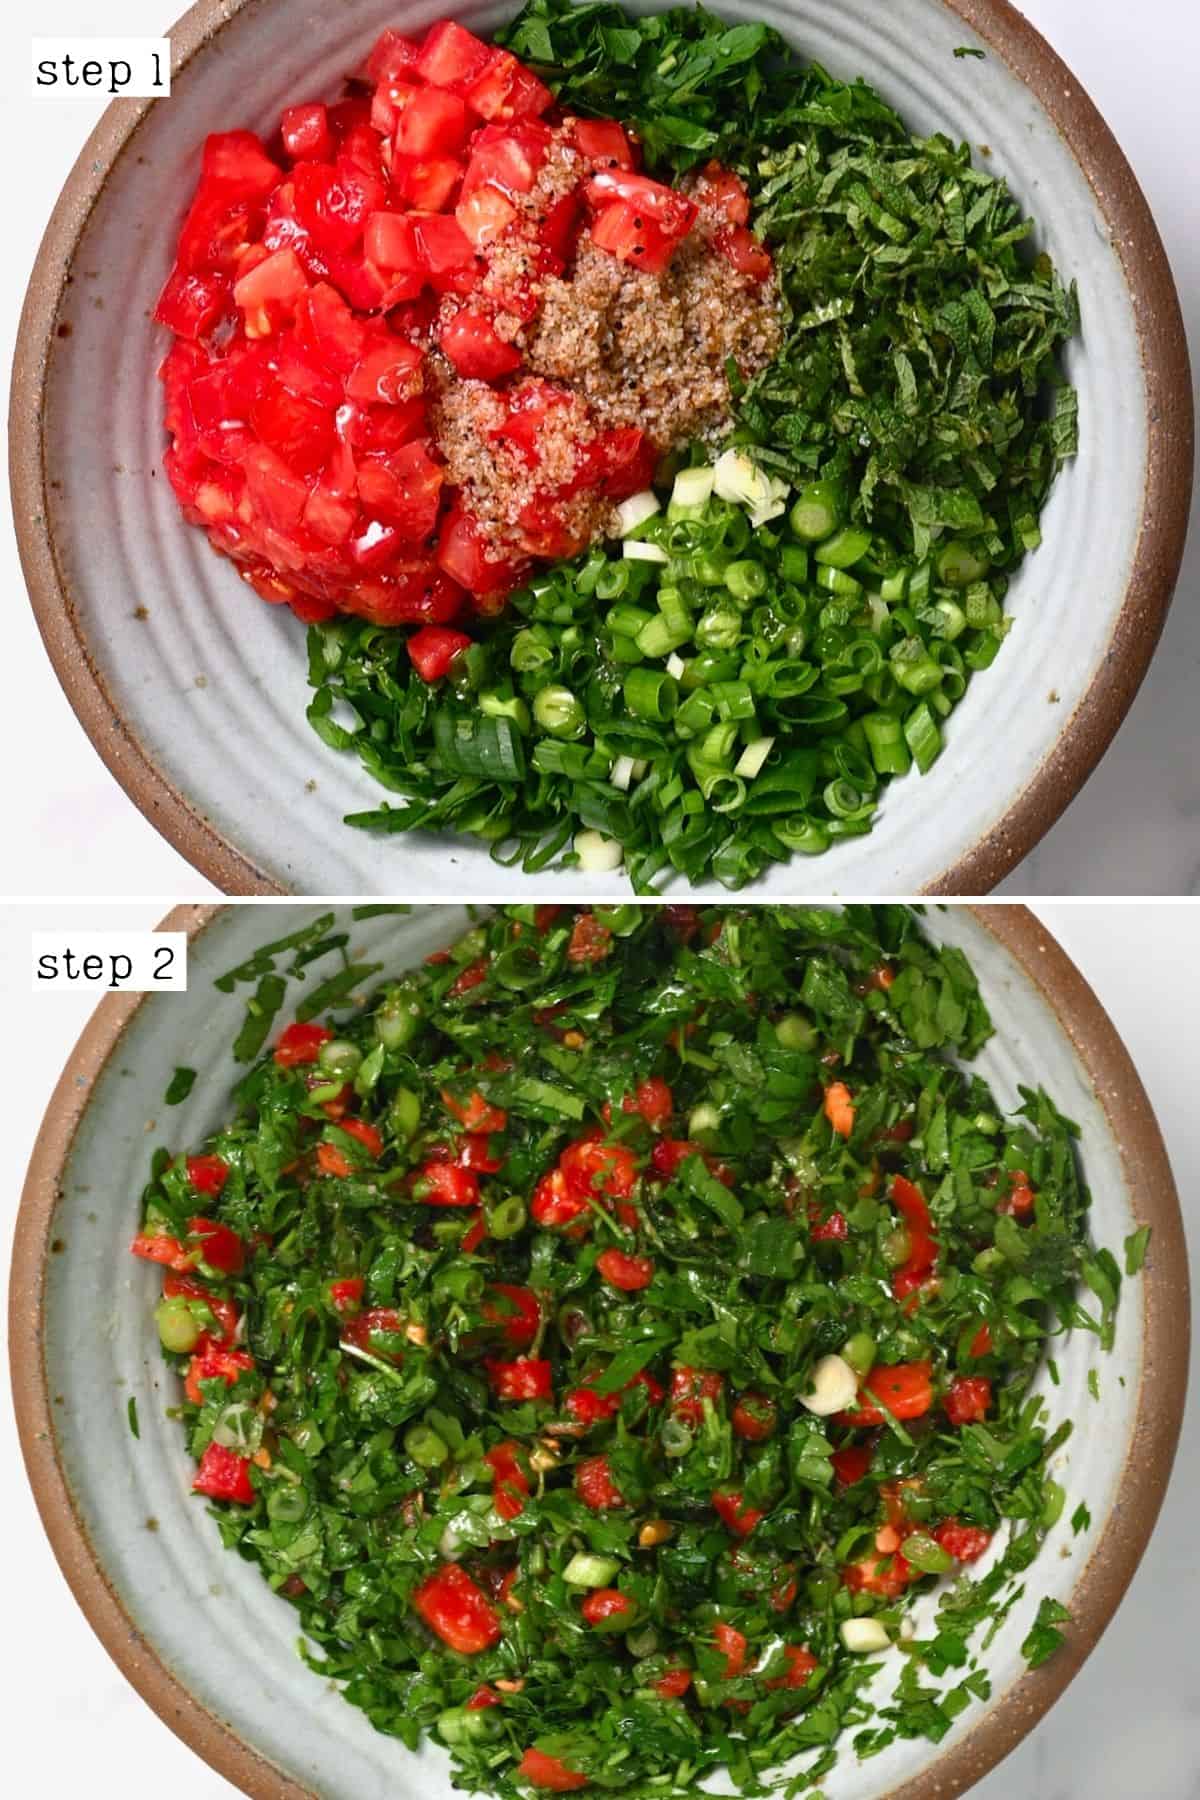 Steps for mixing Tabbouleh salad